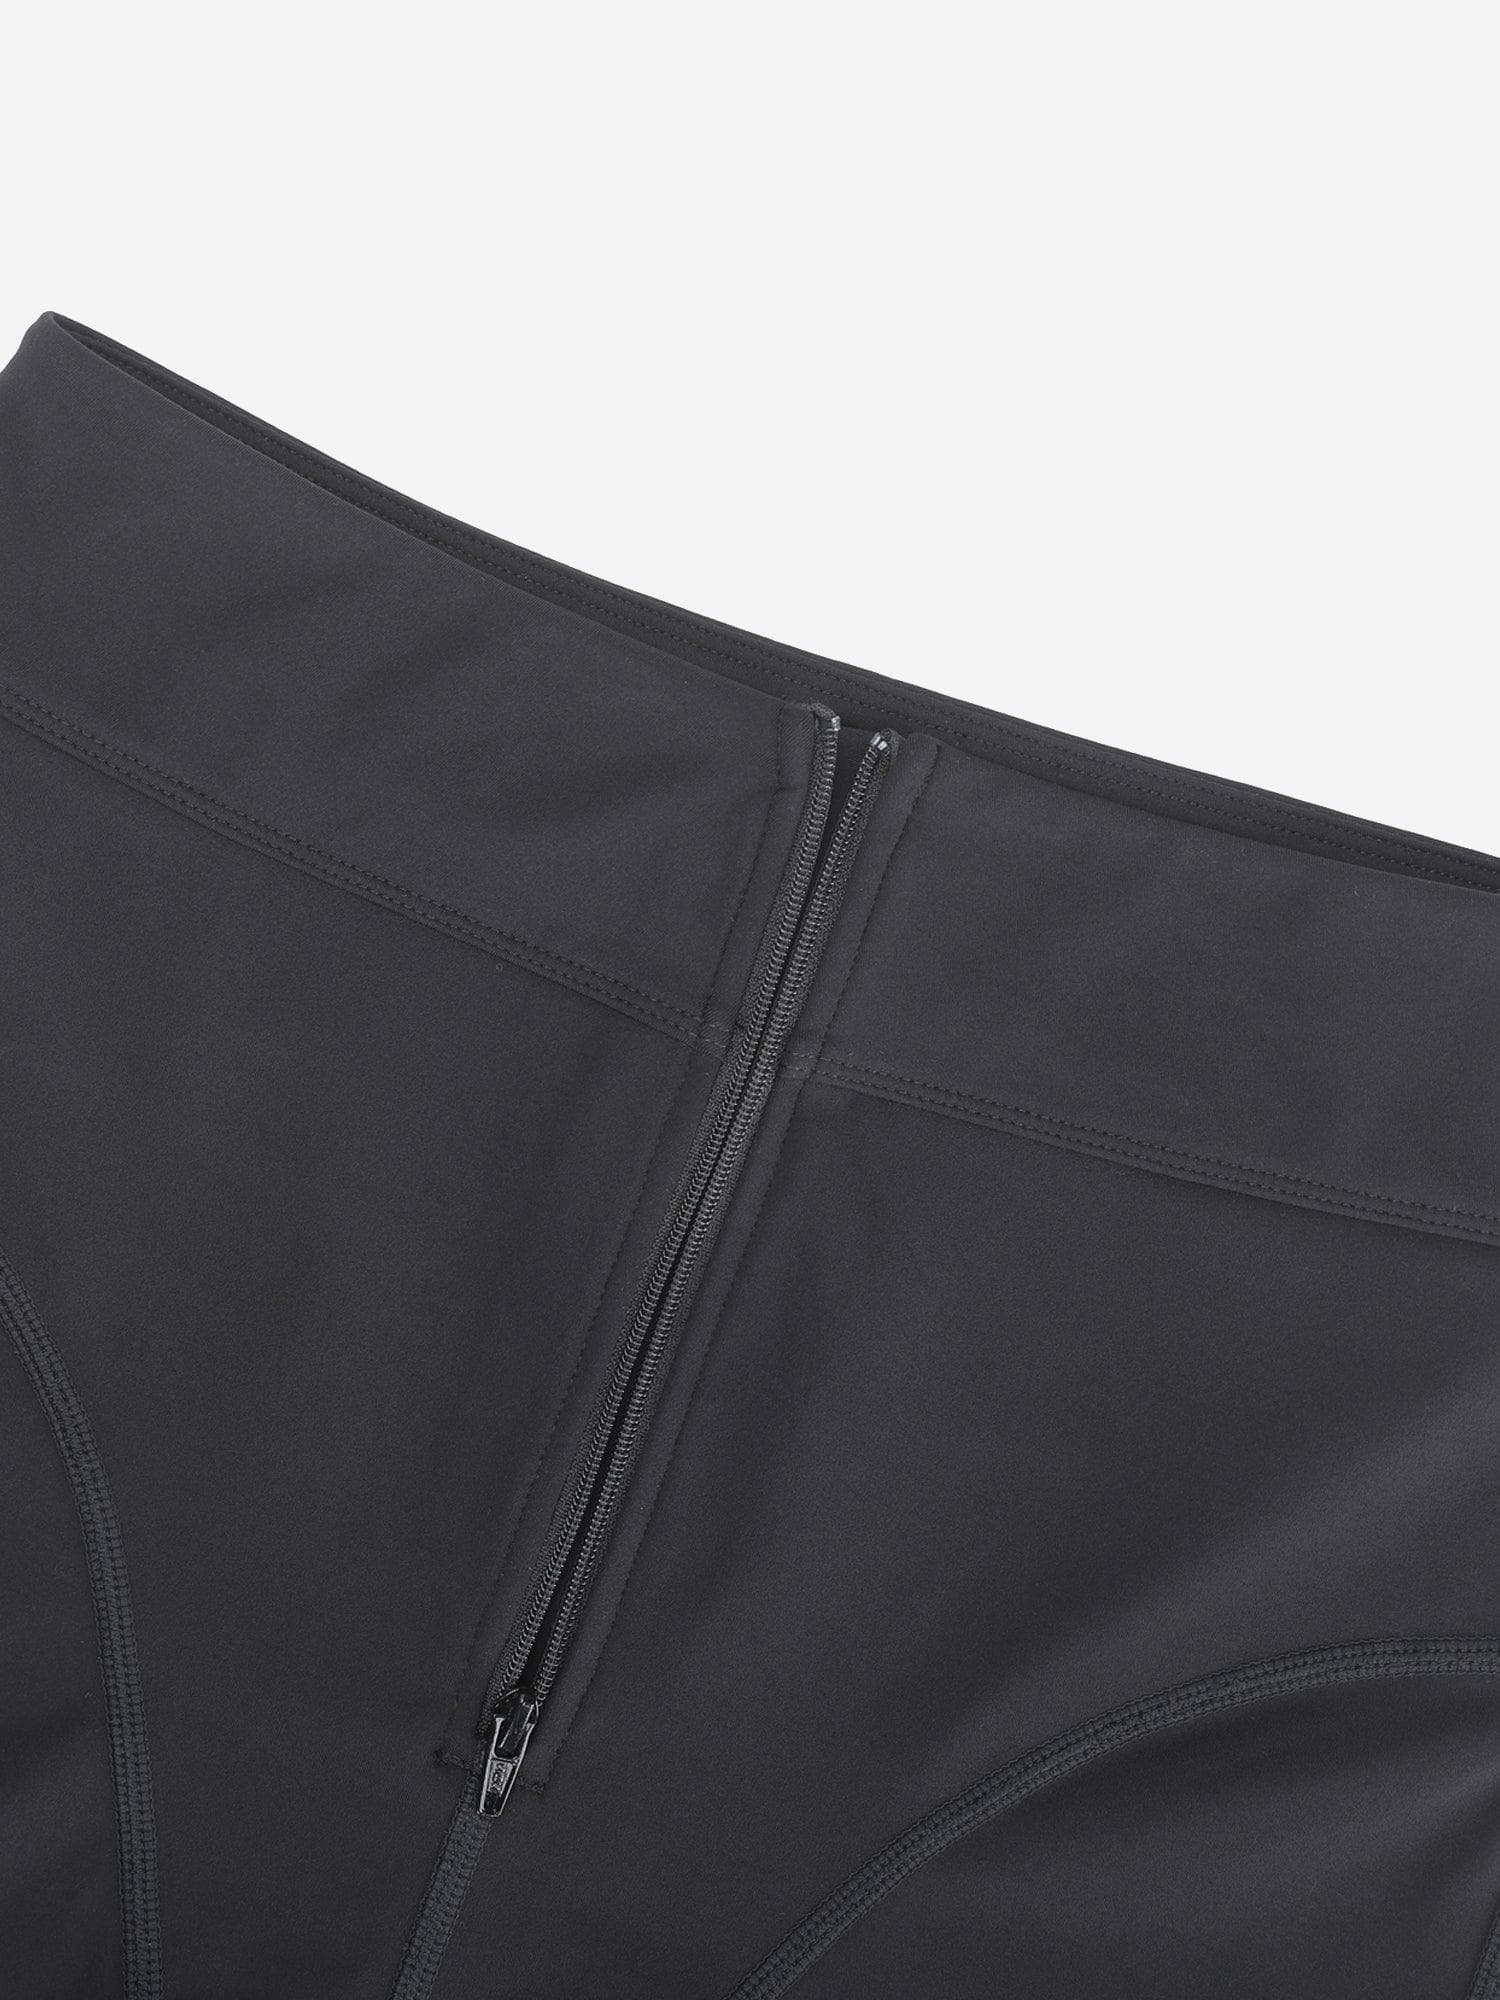 Pet Hair Resistant Mid Tight Activewear Shorts